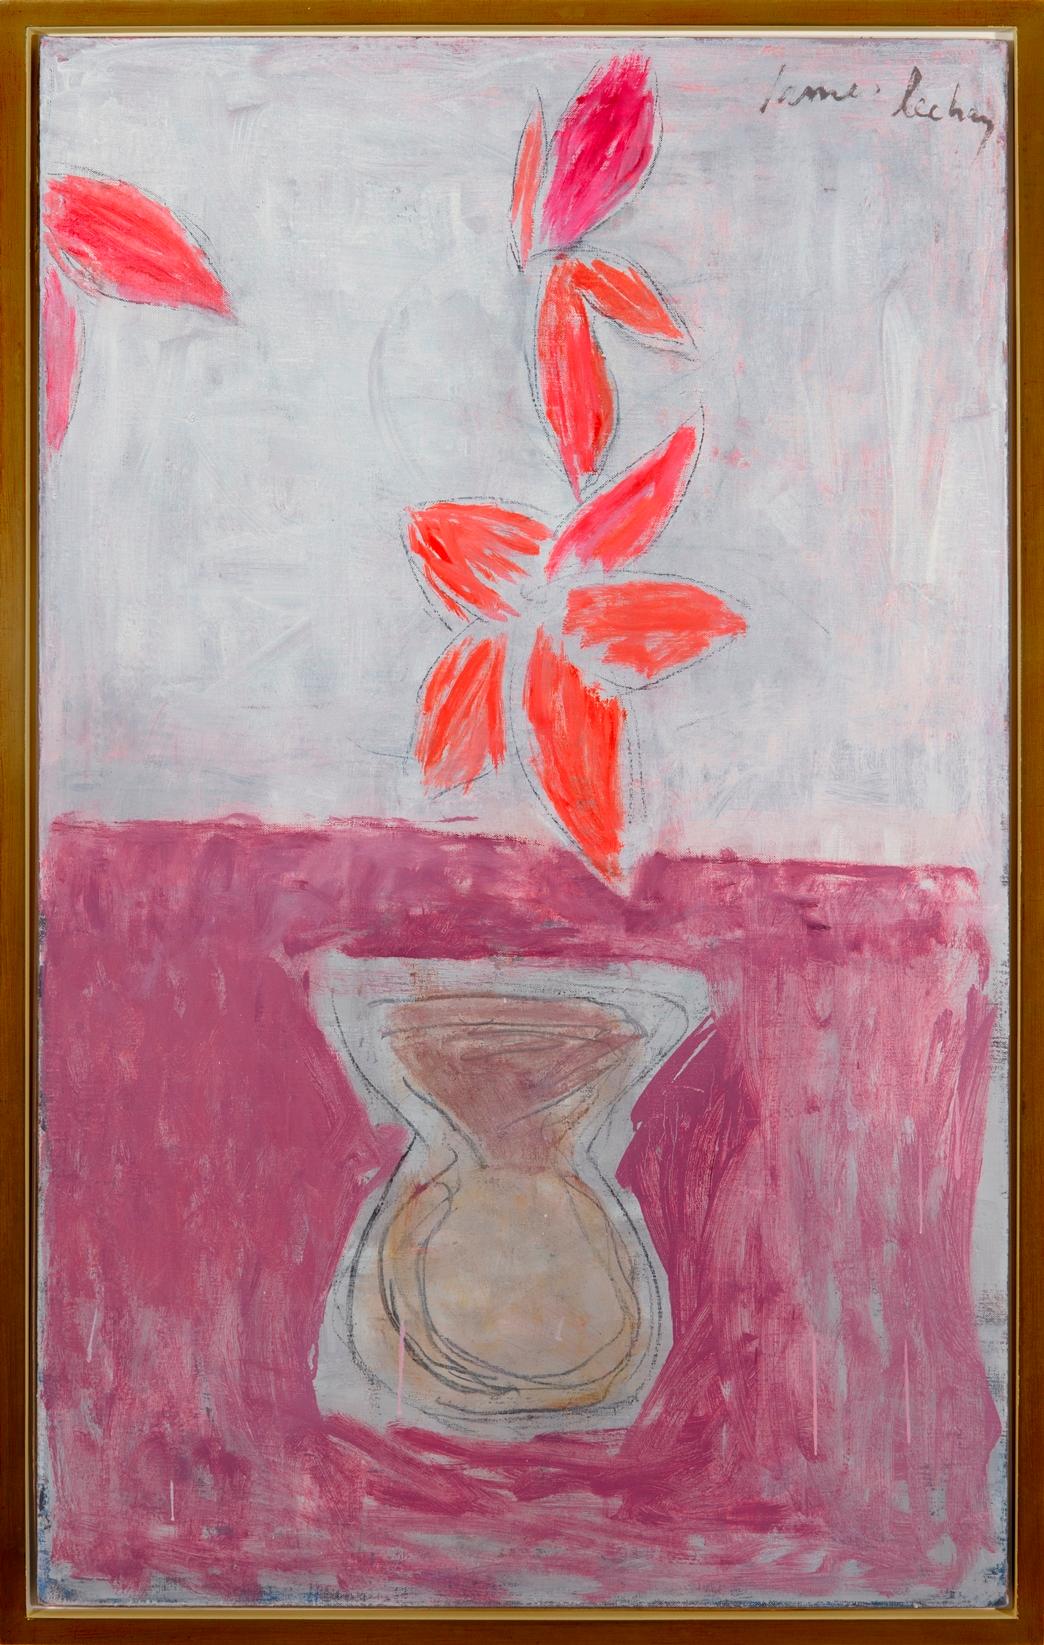 James Lechay Abstract Painting - "Pink Vase with Flowers"